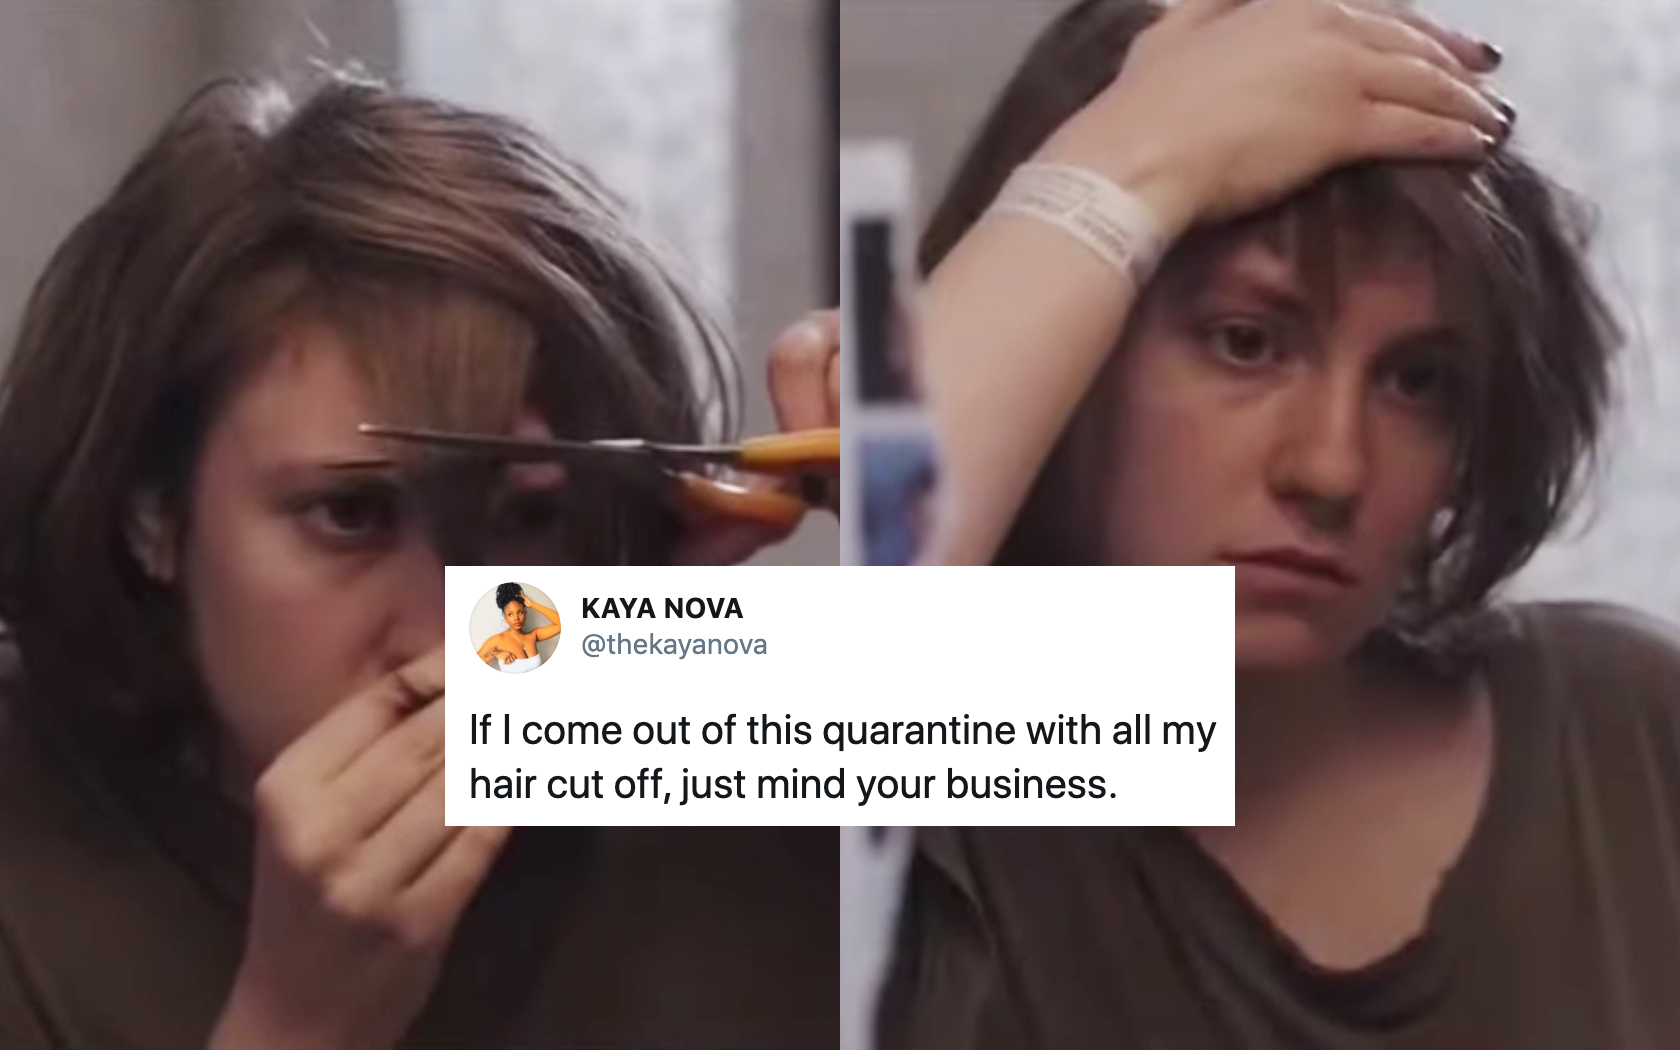 How To Cut Your Own Hair At Home, According To A Pro Hairdresser